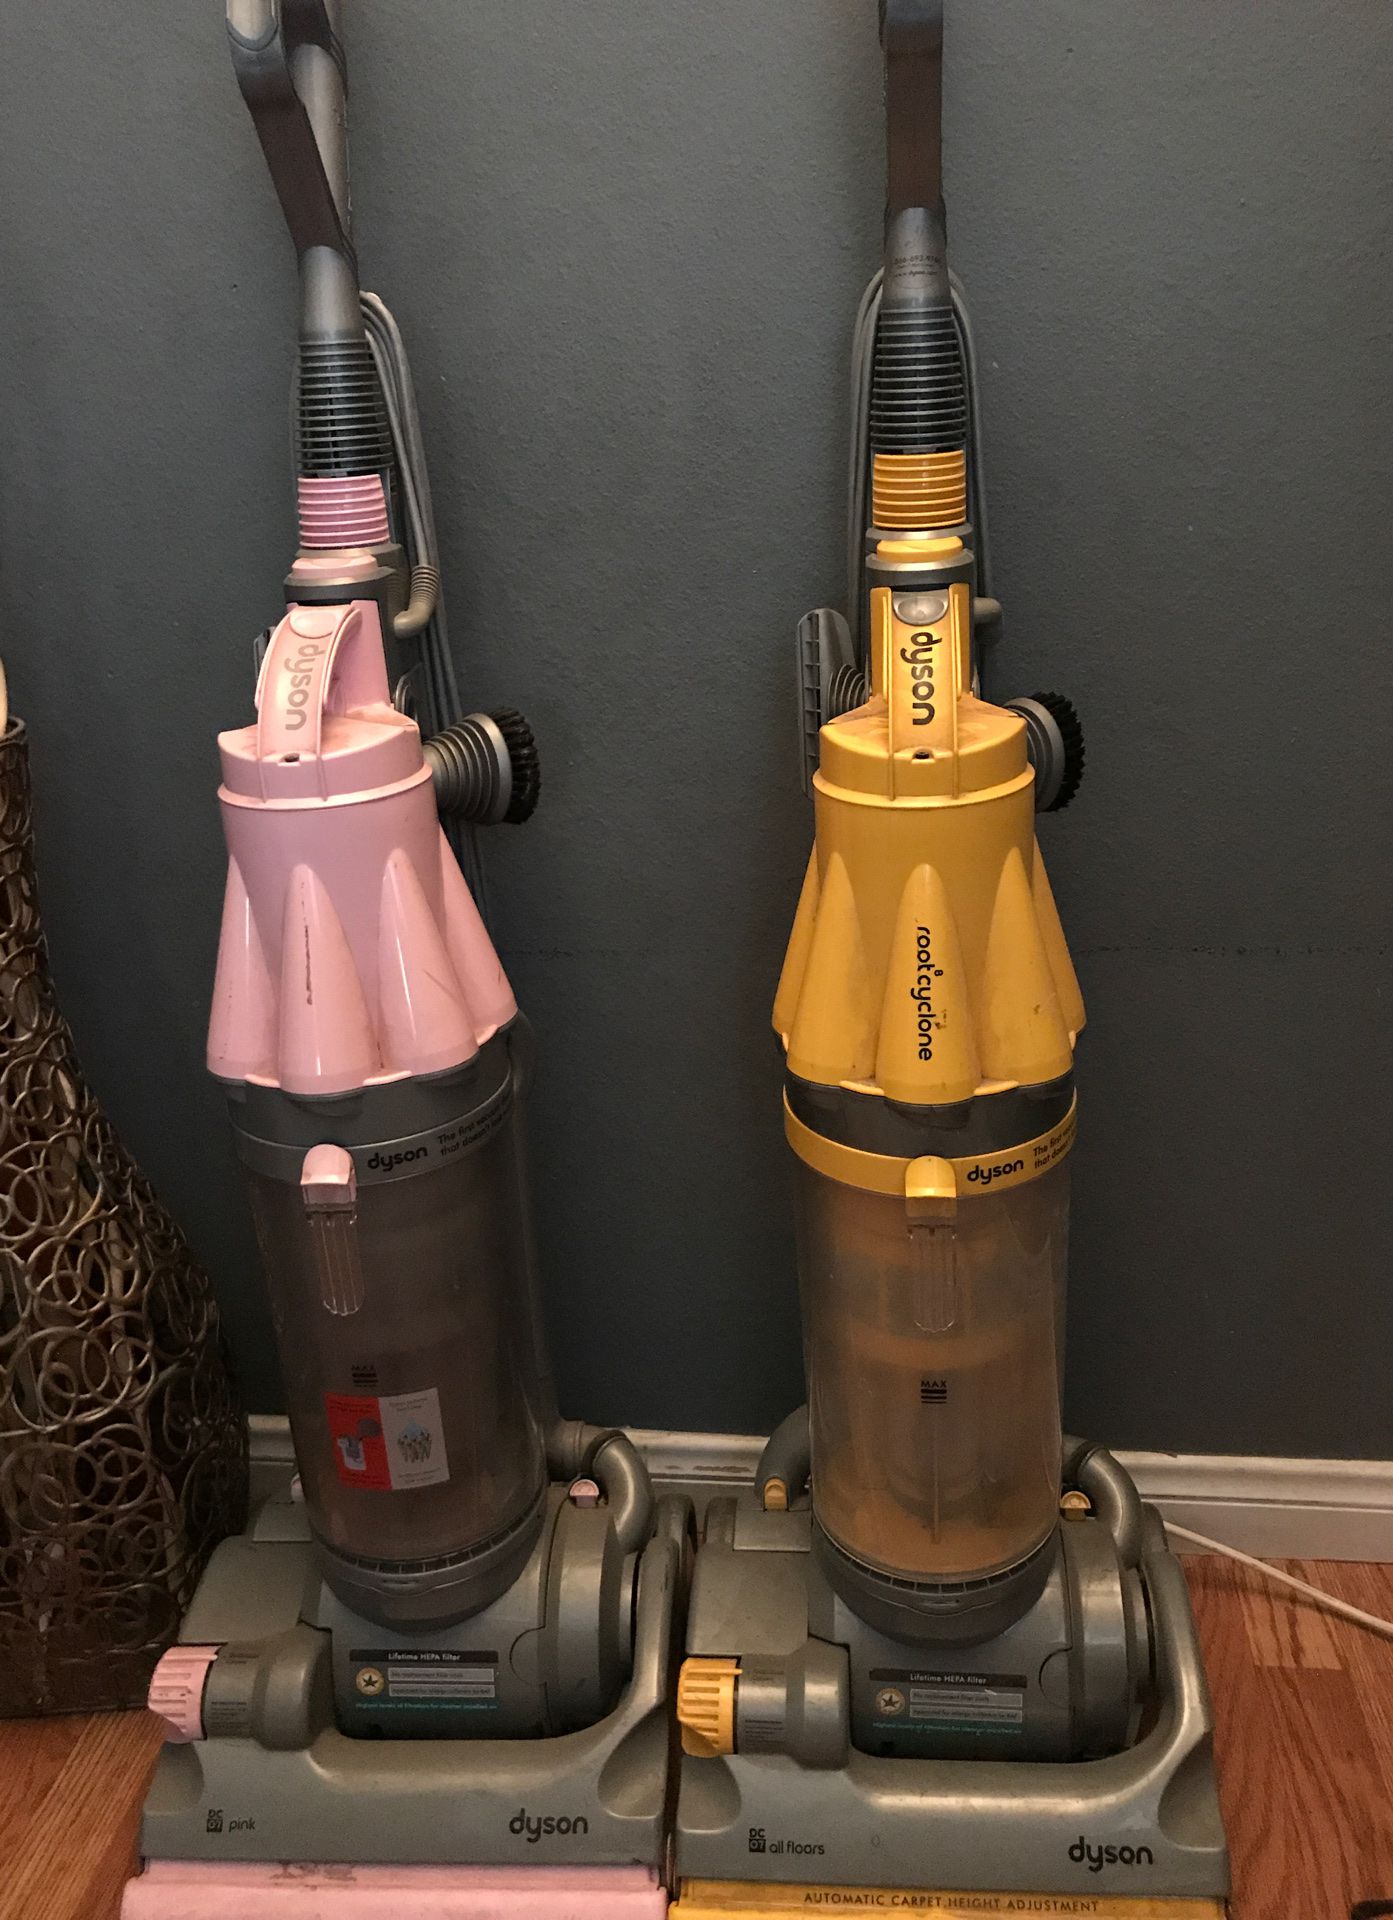 Two Dyson vacuums all they need is the band ...best offer